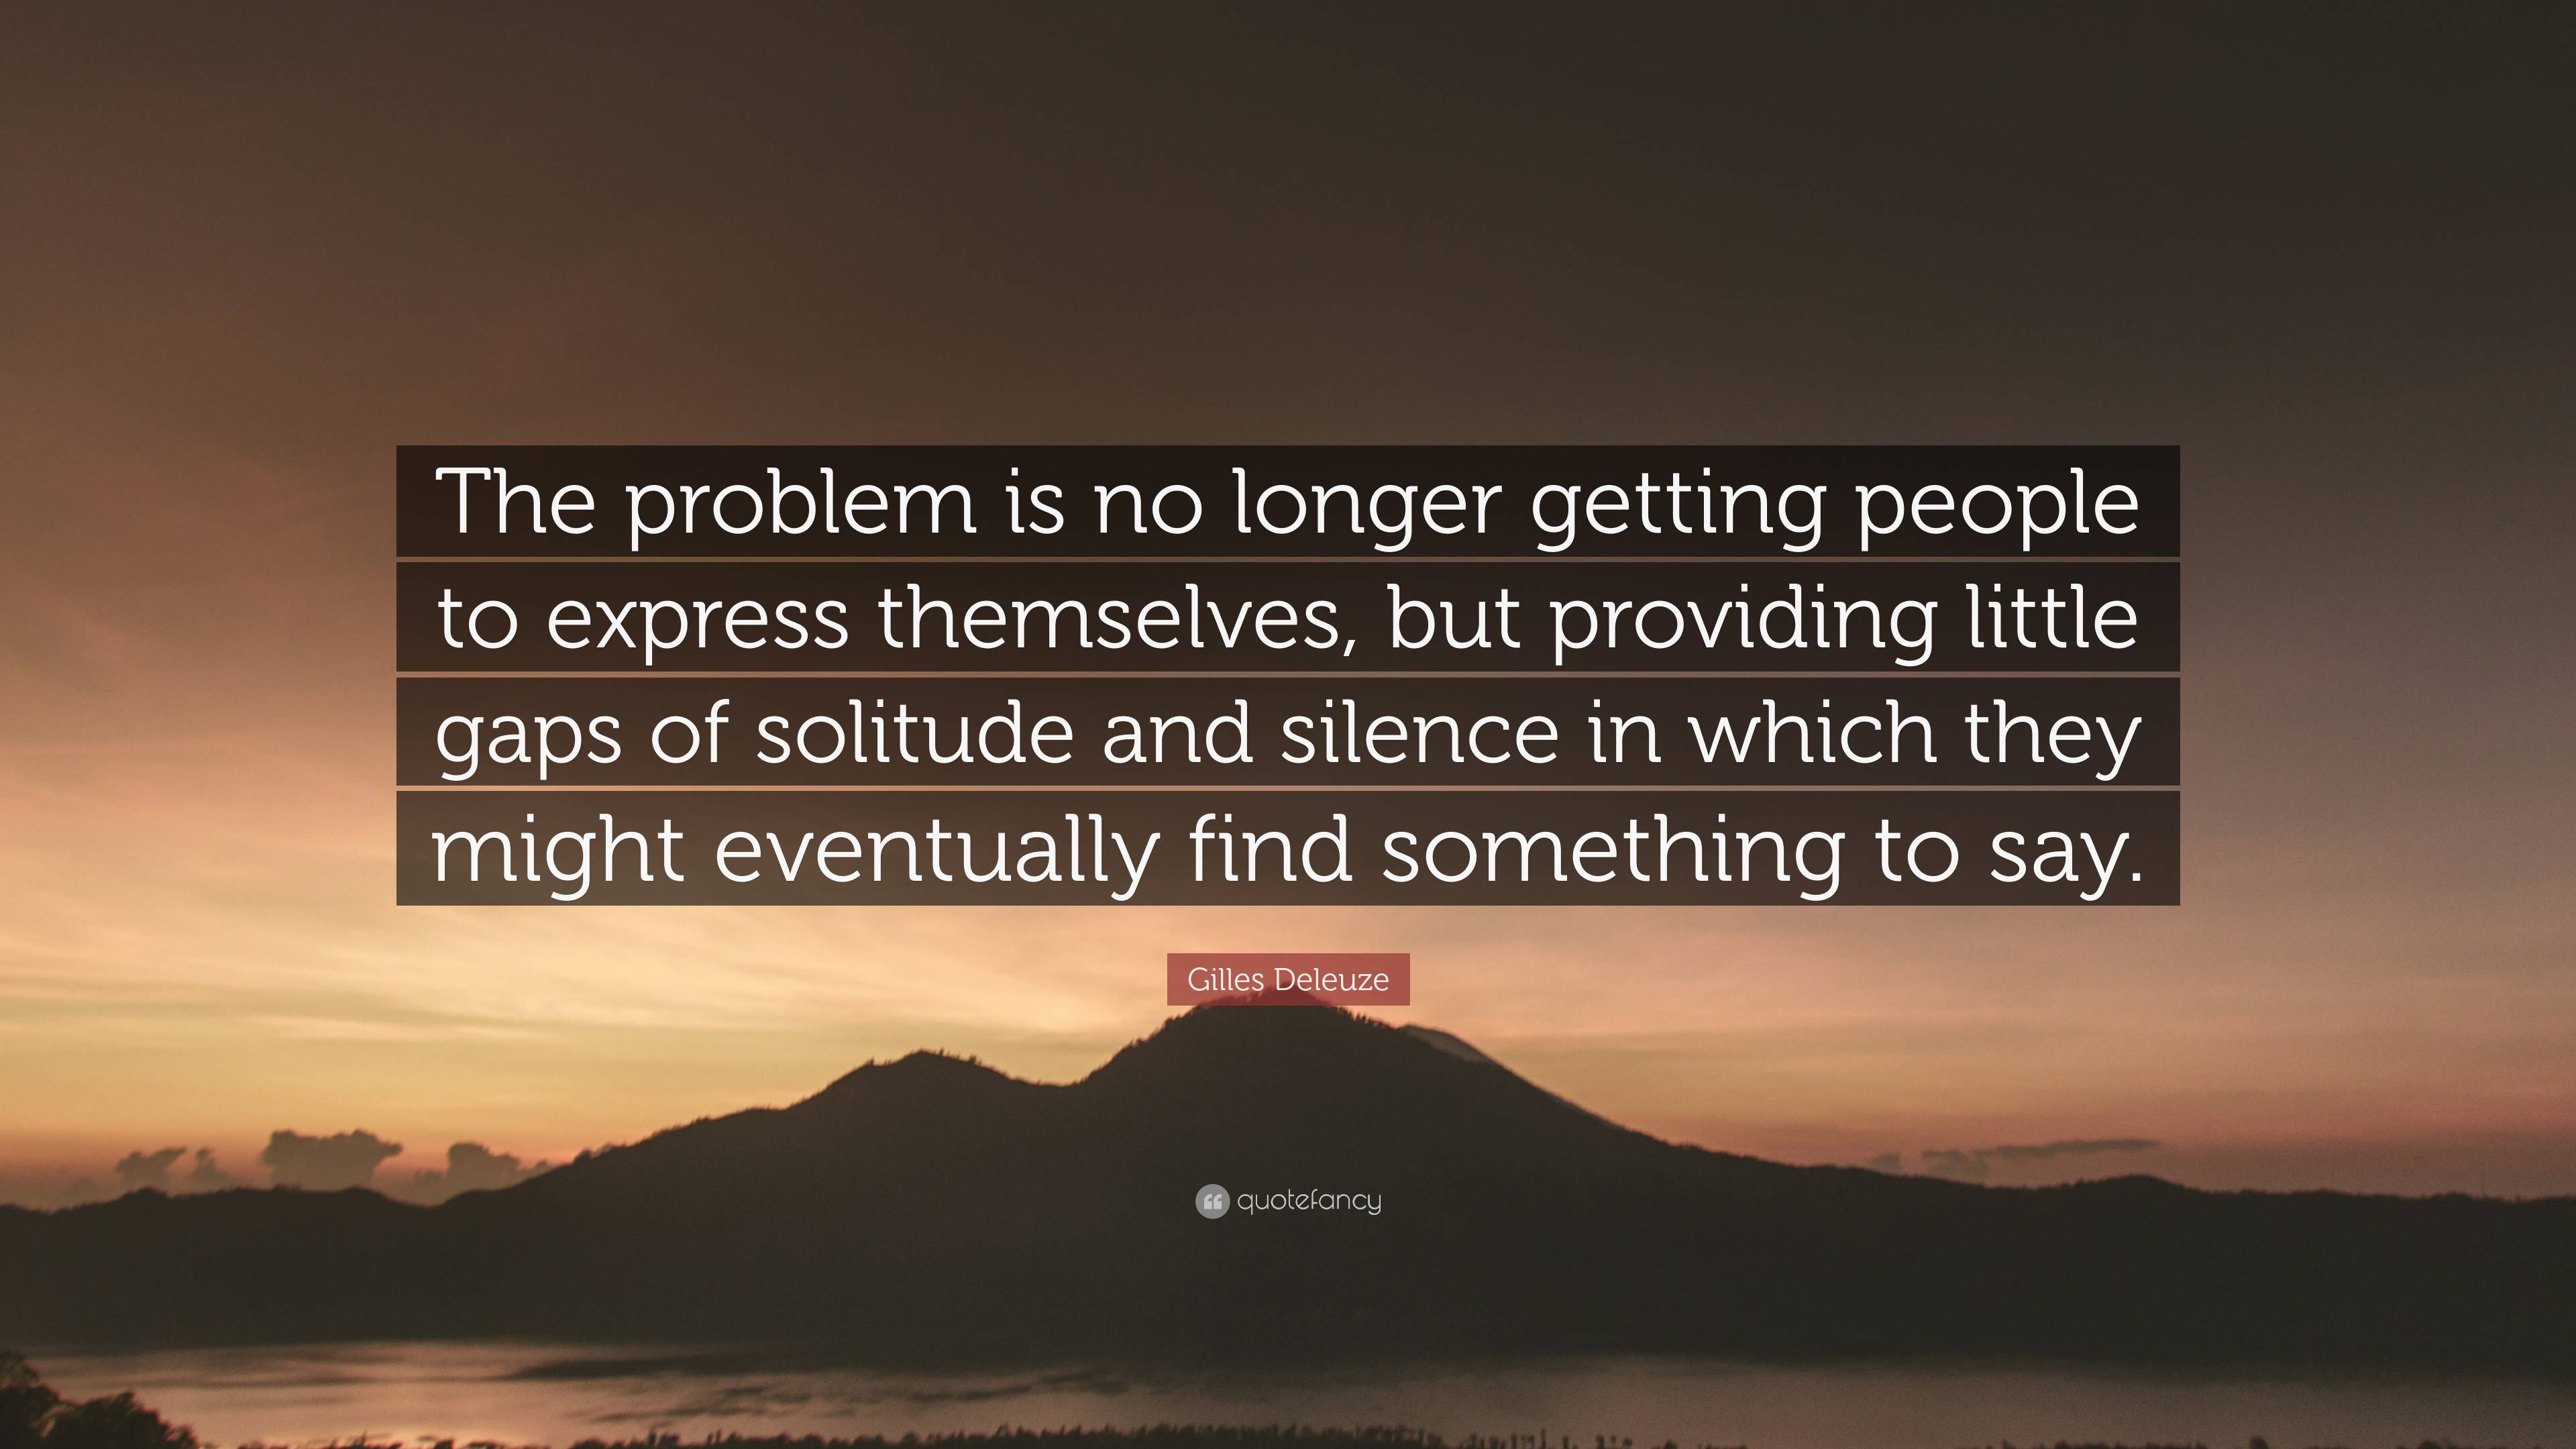 Gilles Deleuze Quote: “The problem is no longer getting people to ...